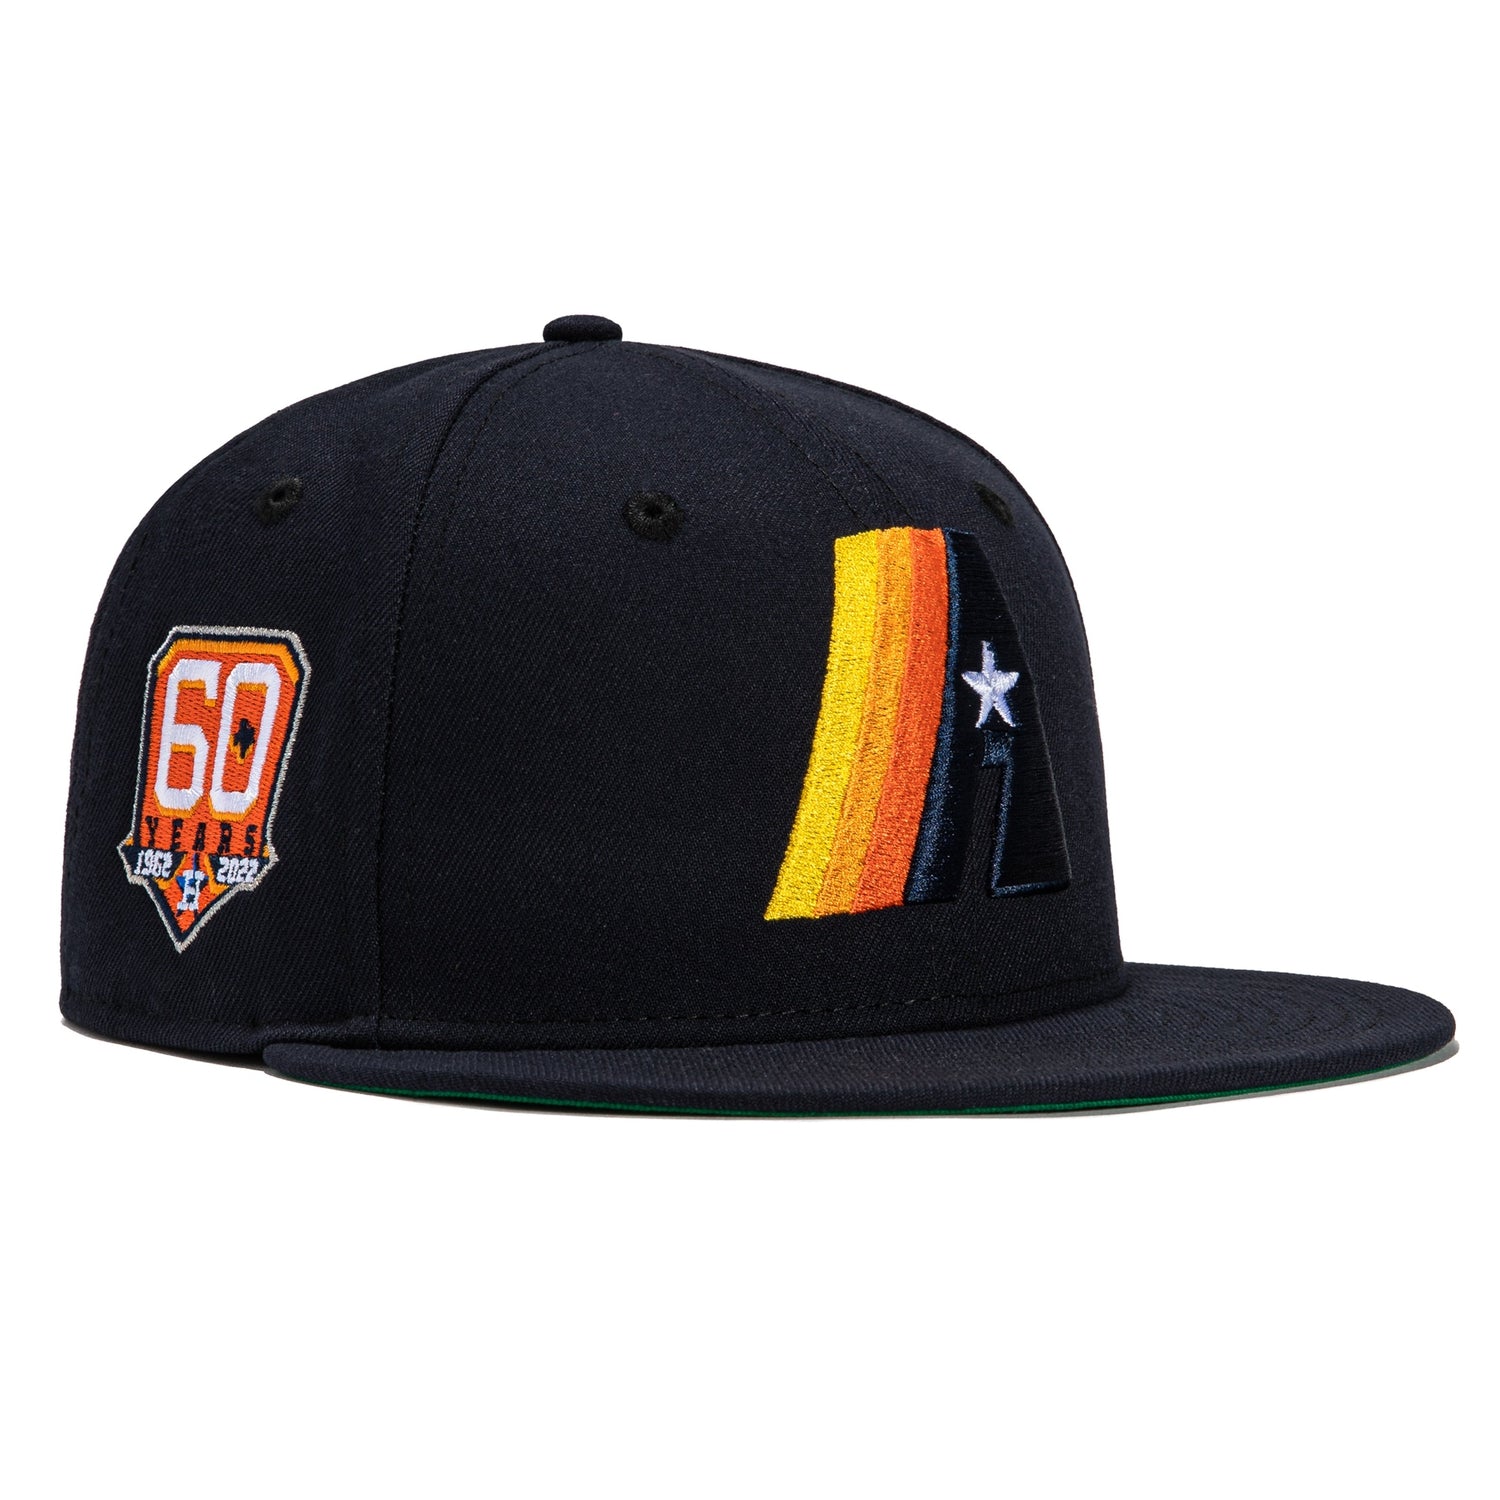 Houston Astros release 60th anniversary patch for 2022 season